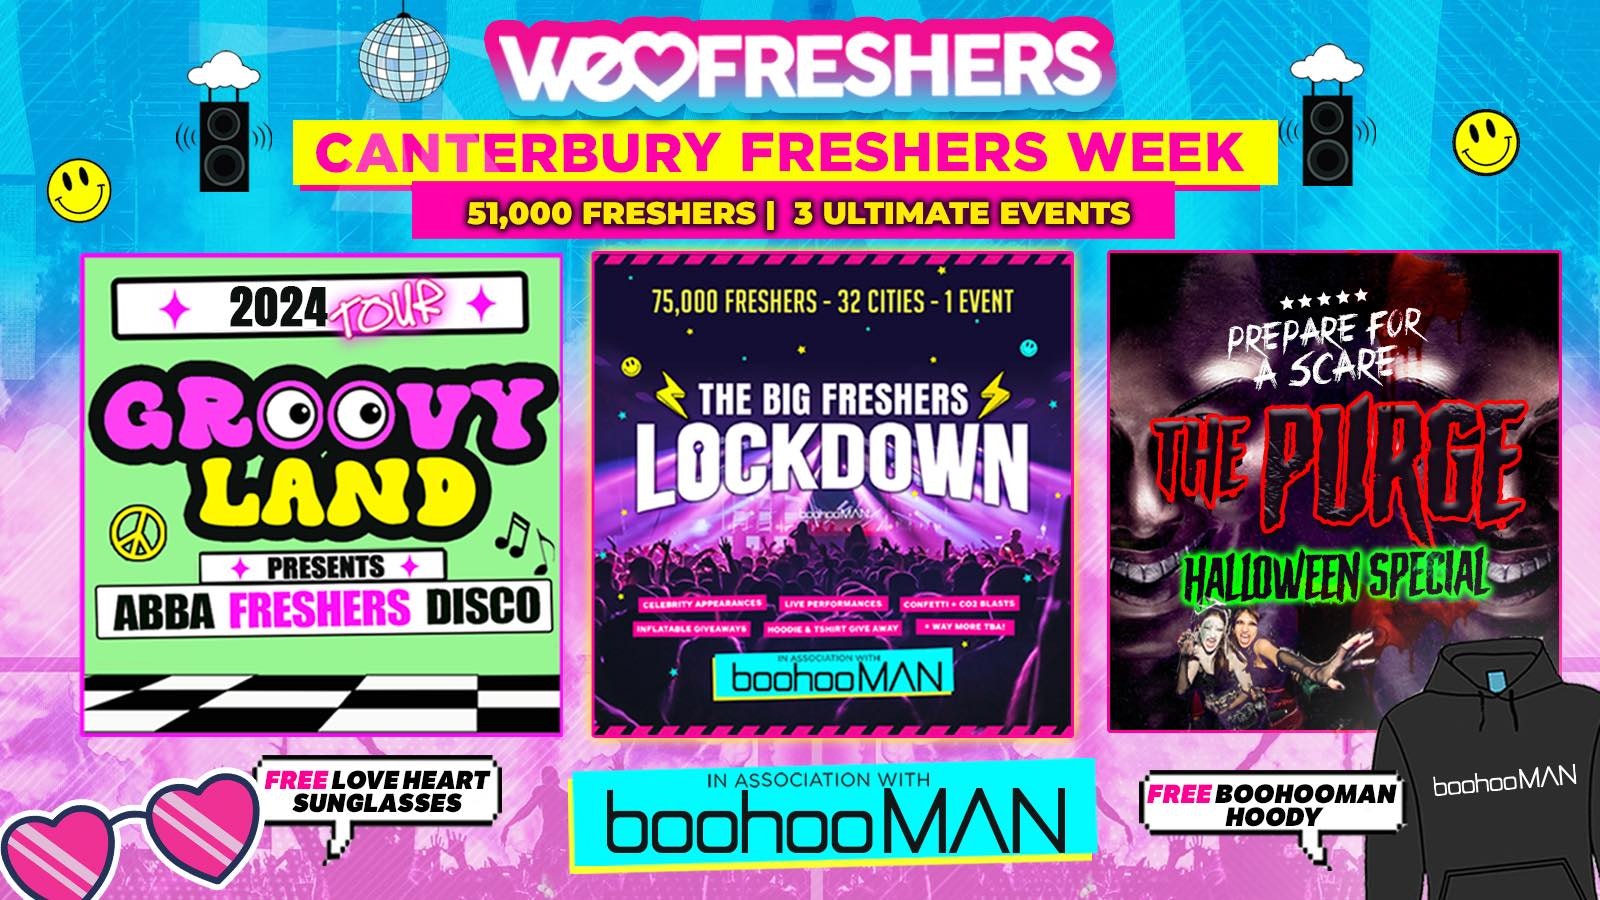 WE LOVE CANTERBURY FRESHERS 2024 in association with boohooMAN  – 3 EVENTS❗